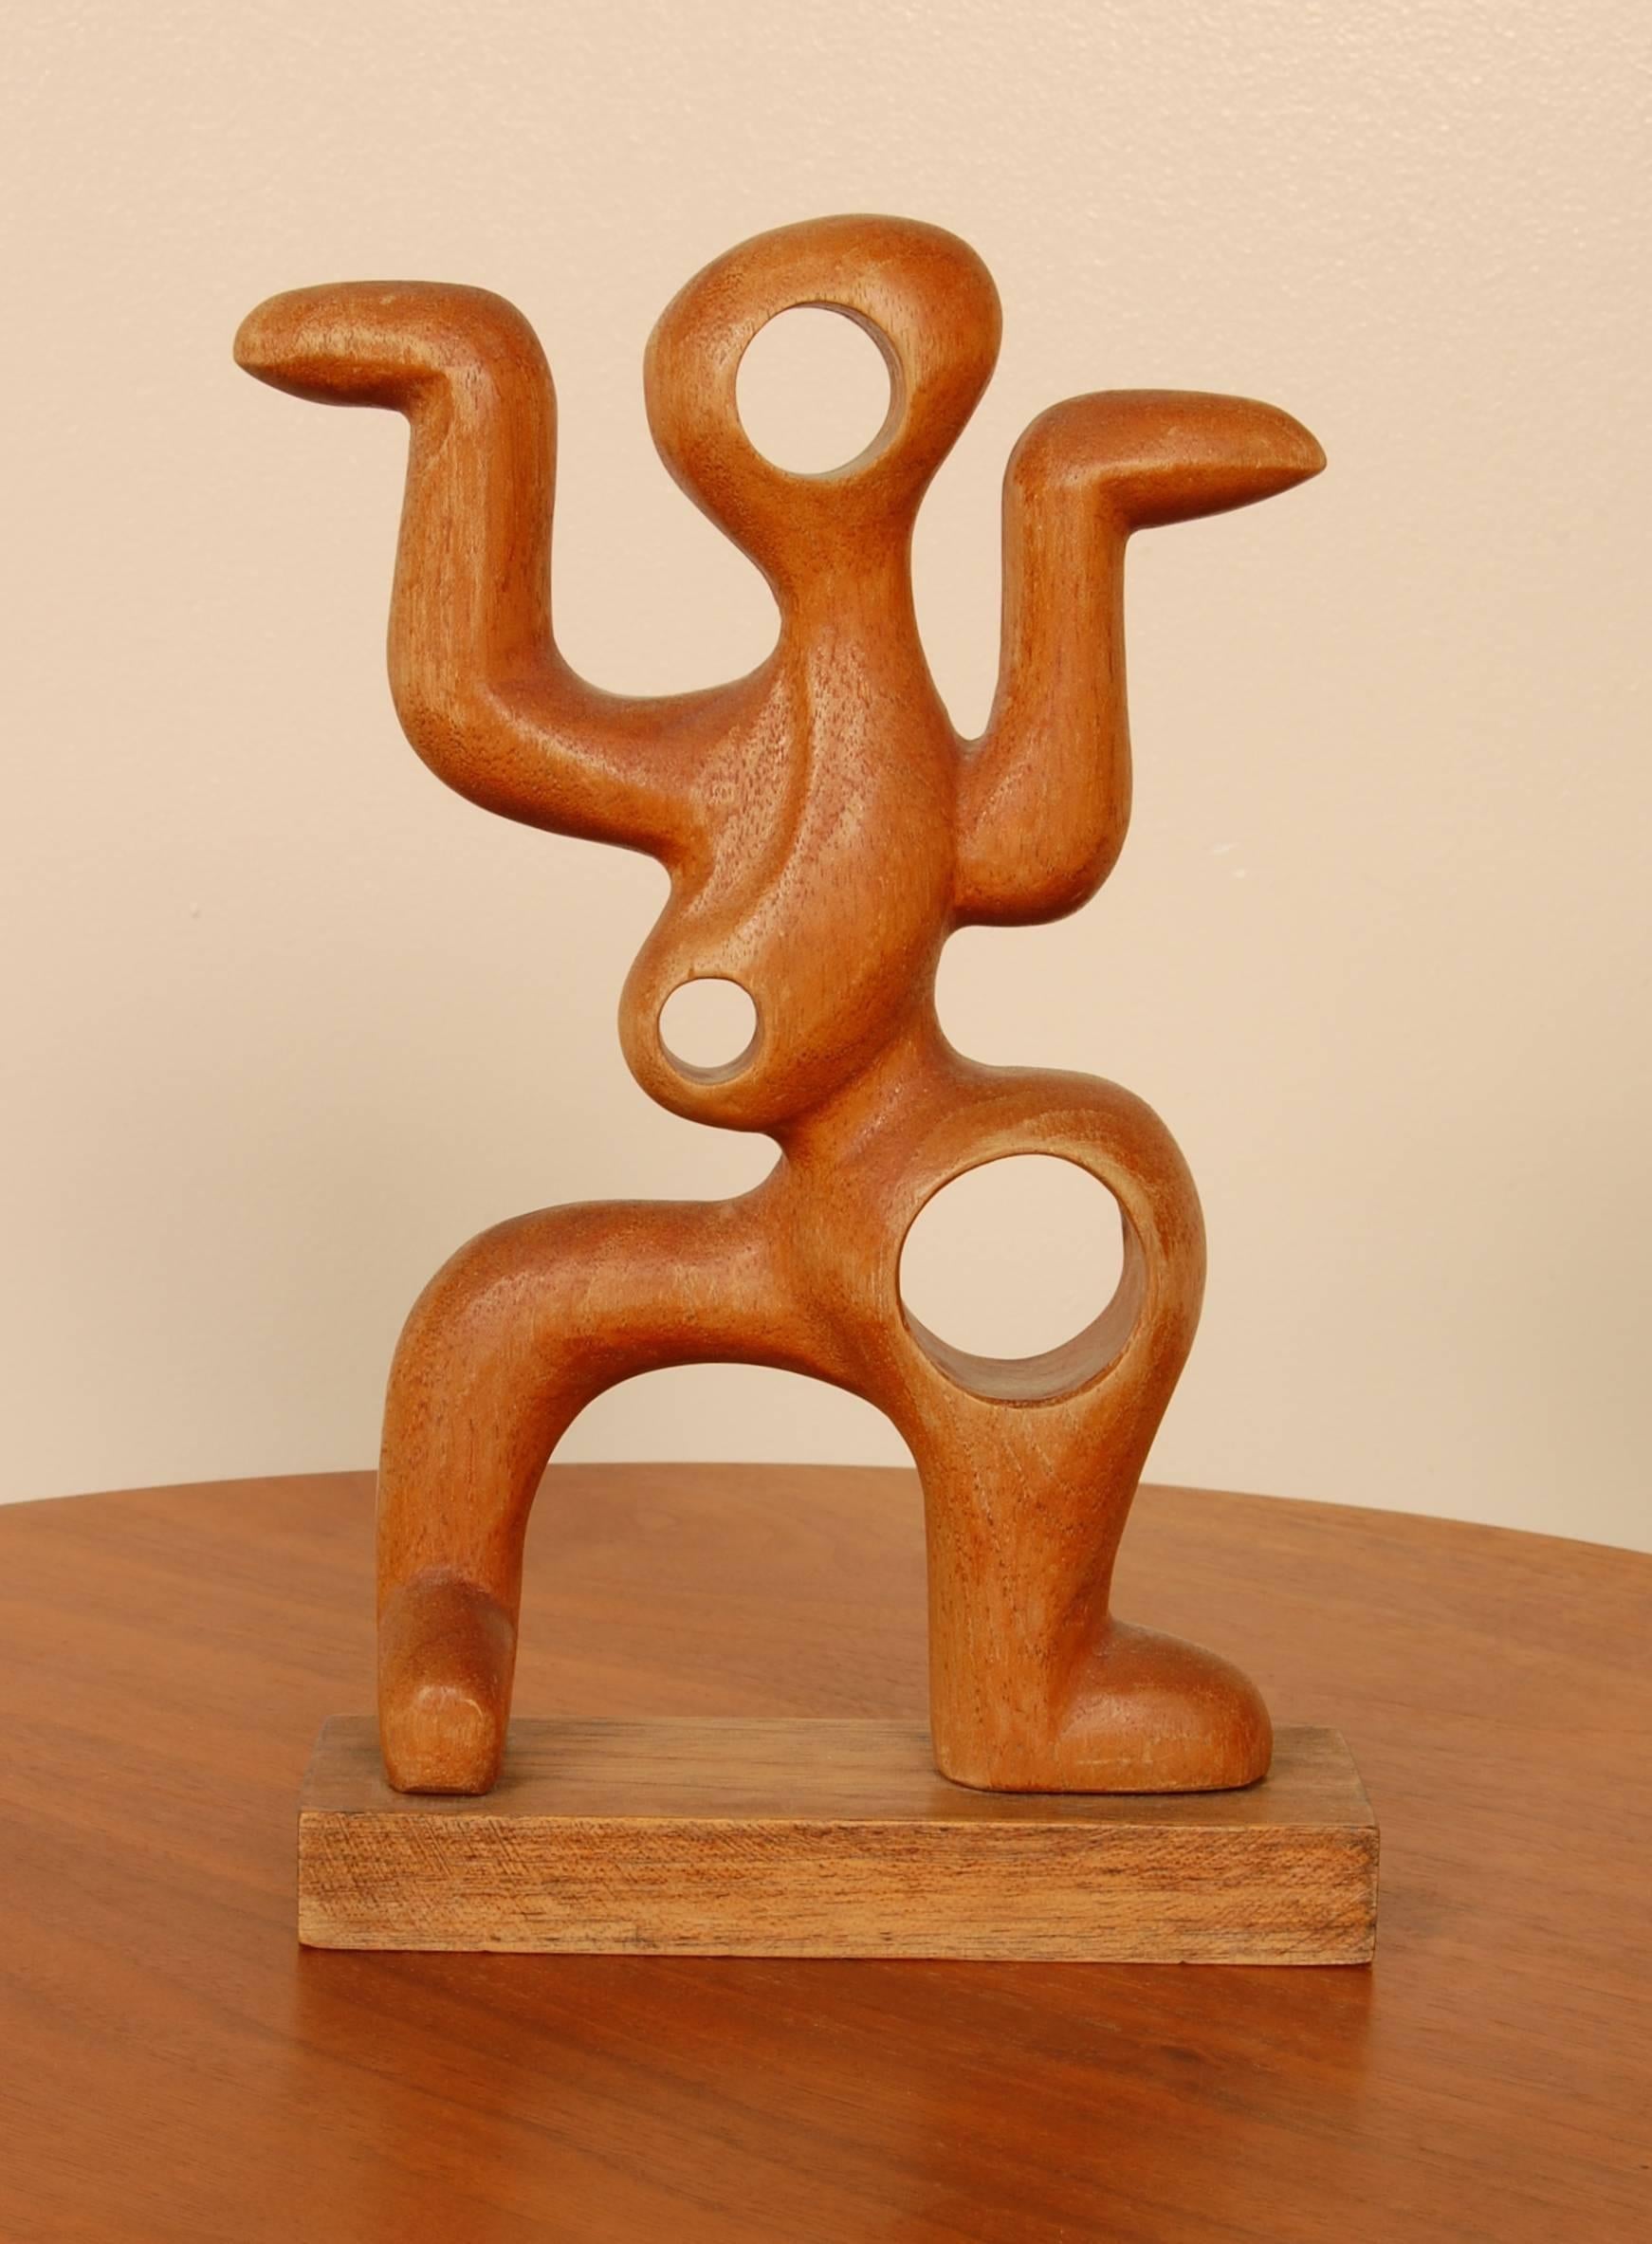 Mexican artist Jose Pinal (1913-1983) was referred to as Mexico's Picasso, his work was shown at the 1939 San Francisco World's Fair. This is an unusual piece by Pinal as he didn't do many figurative abstracts, this one most likely dates to the